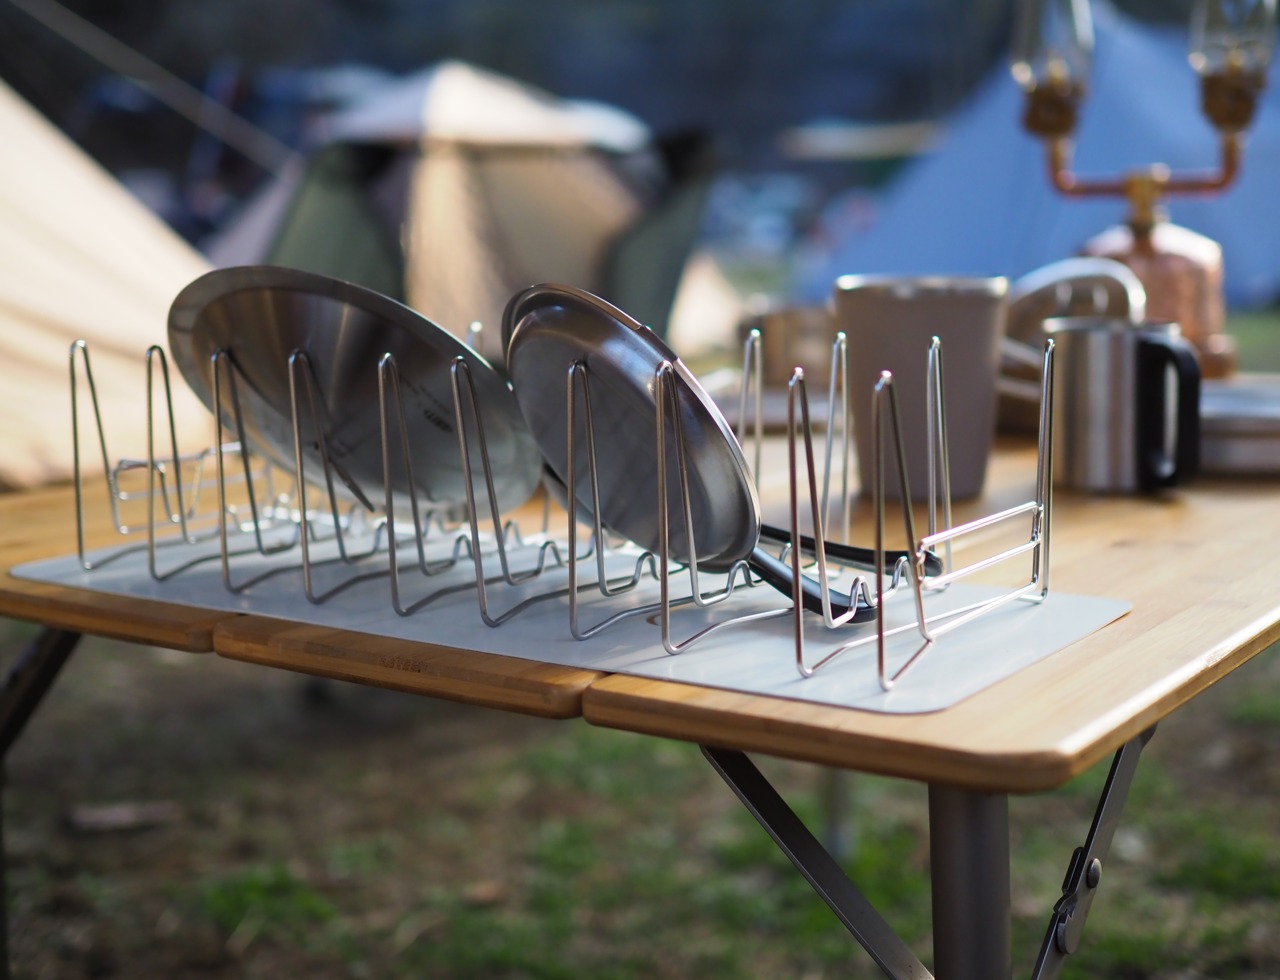 This portable dish rack can collapse down to 1.2 inches in just a second